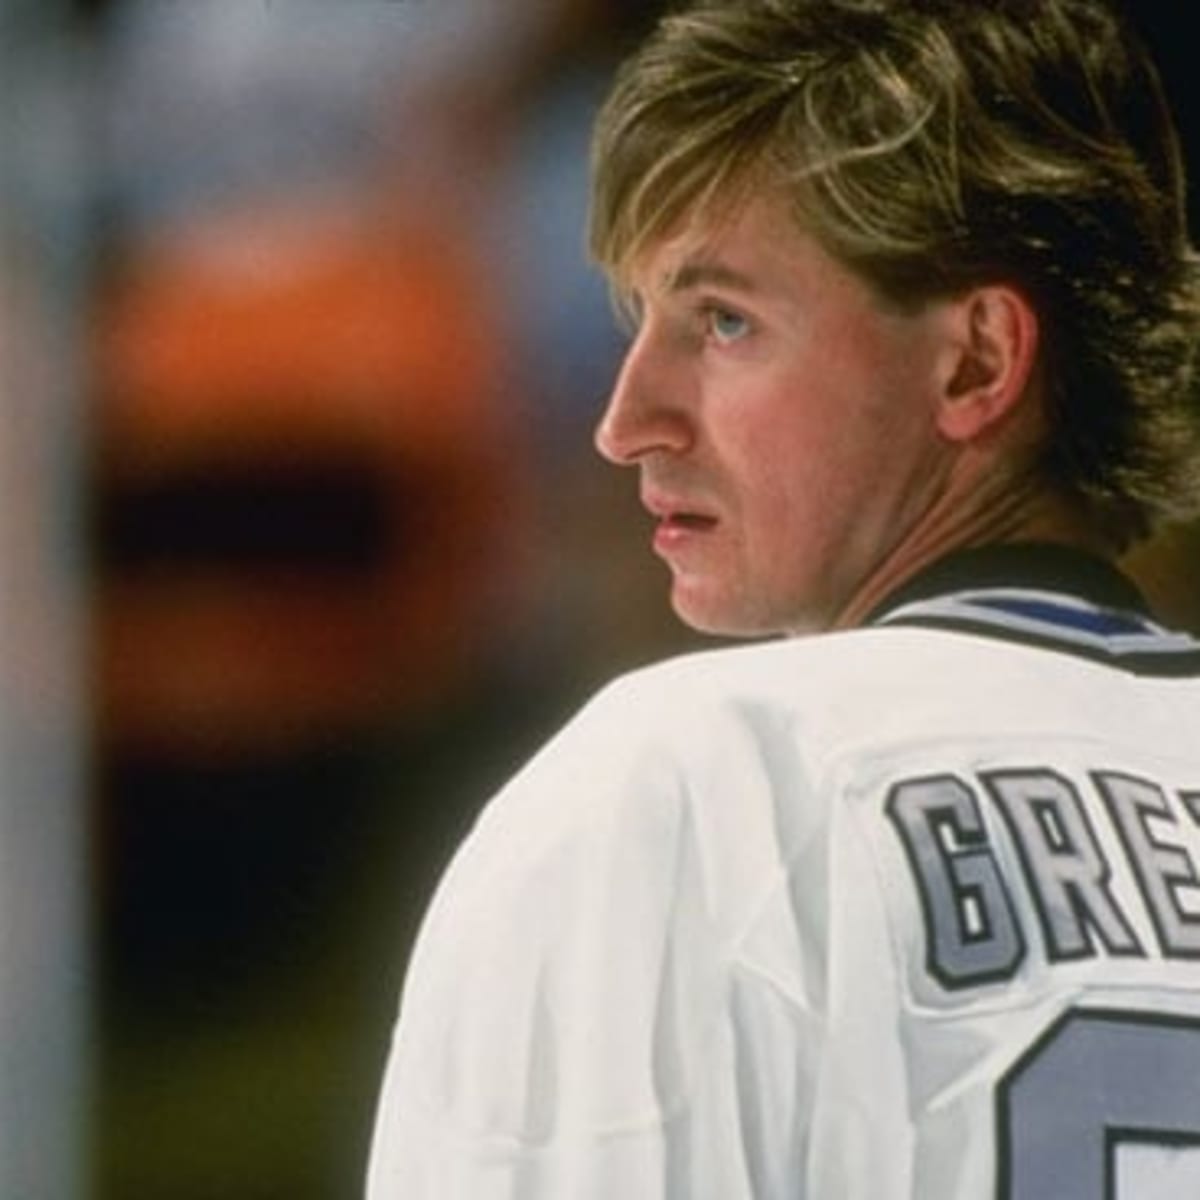 Report: Mark Messier, Wayne Gretzky interested in coaching Rangers